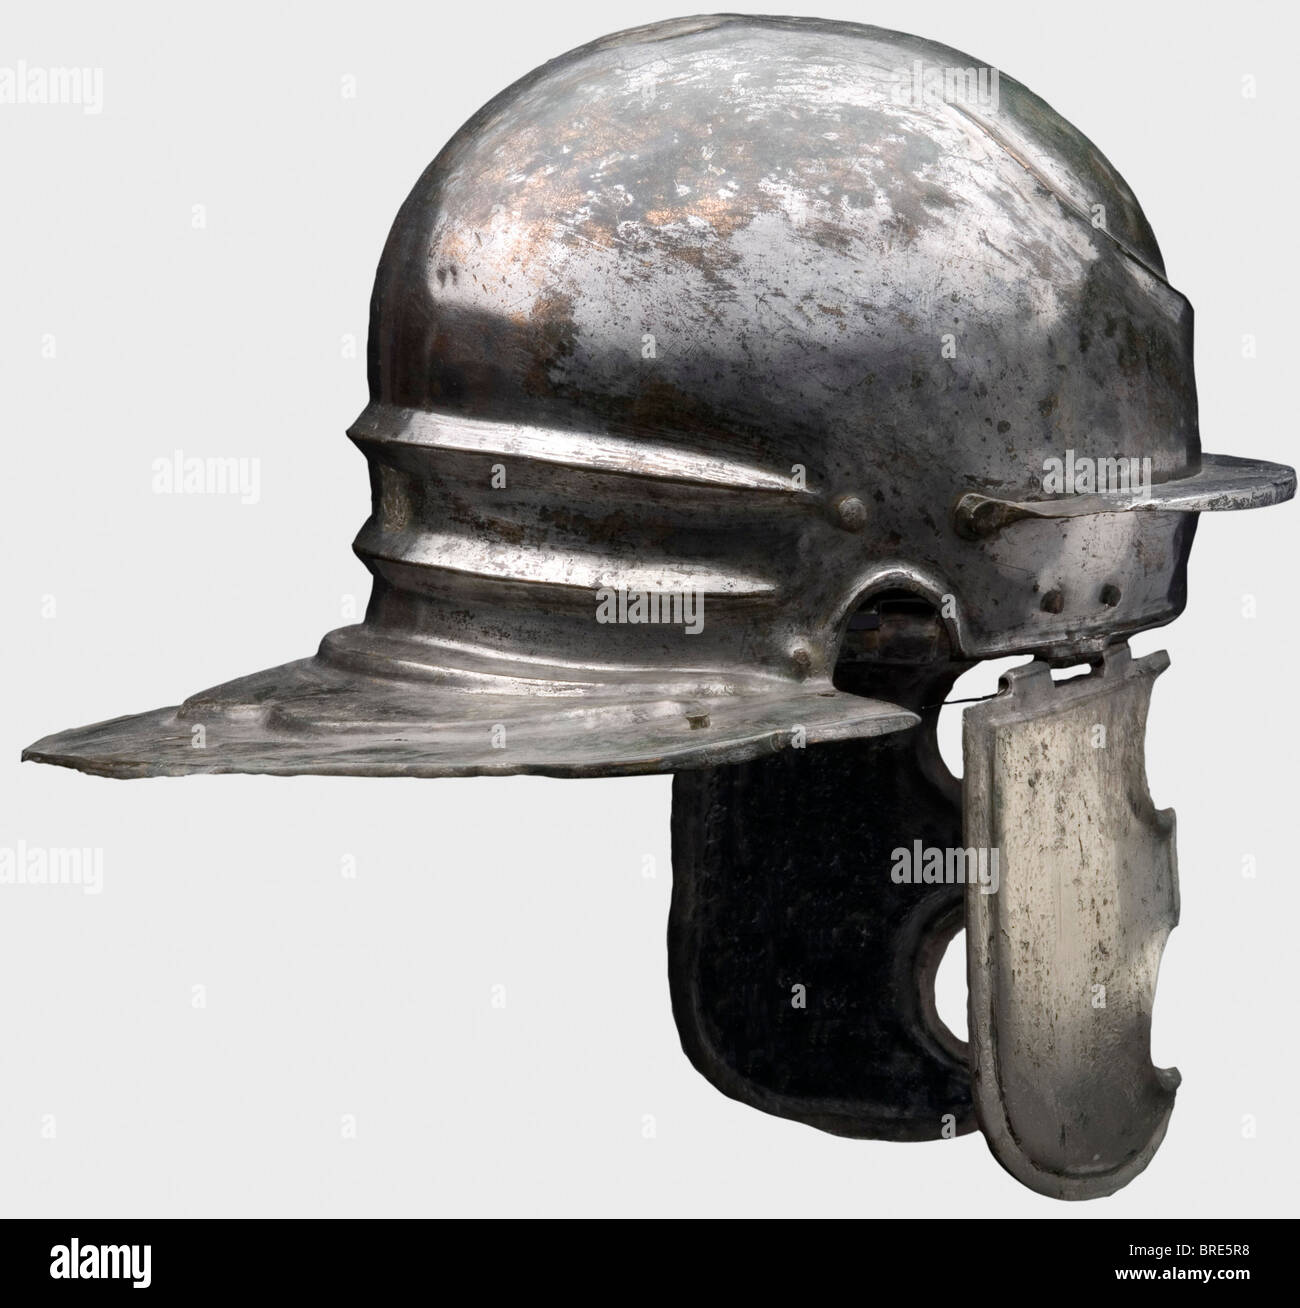 A Roman helmet of the Weisenau/Nijmegen type, 1st century B.C. to 1st  century A.D. Brass or bronze with distinct hammer marks on the inside and  tinned exterior. Widely flaring, contoured neck-guard with